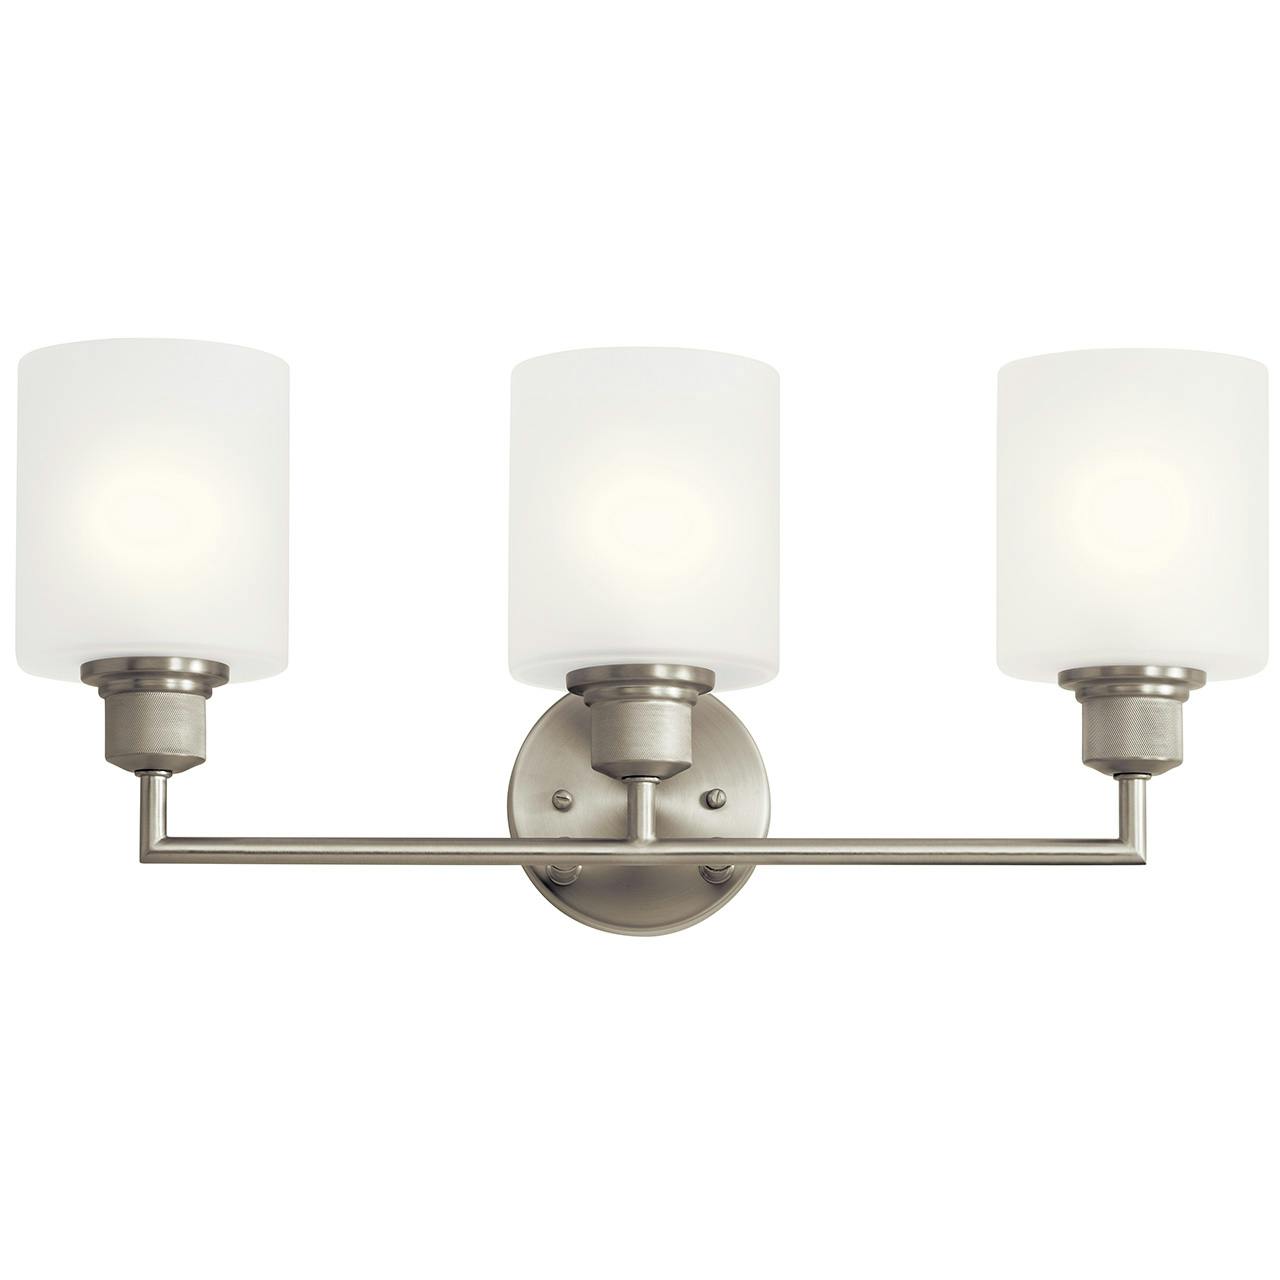 The Lynn Haven 3 Light Vanity Light Nickel facing up on a white background